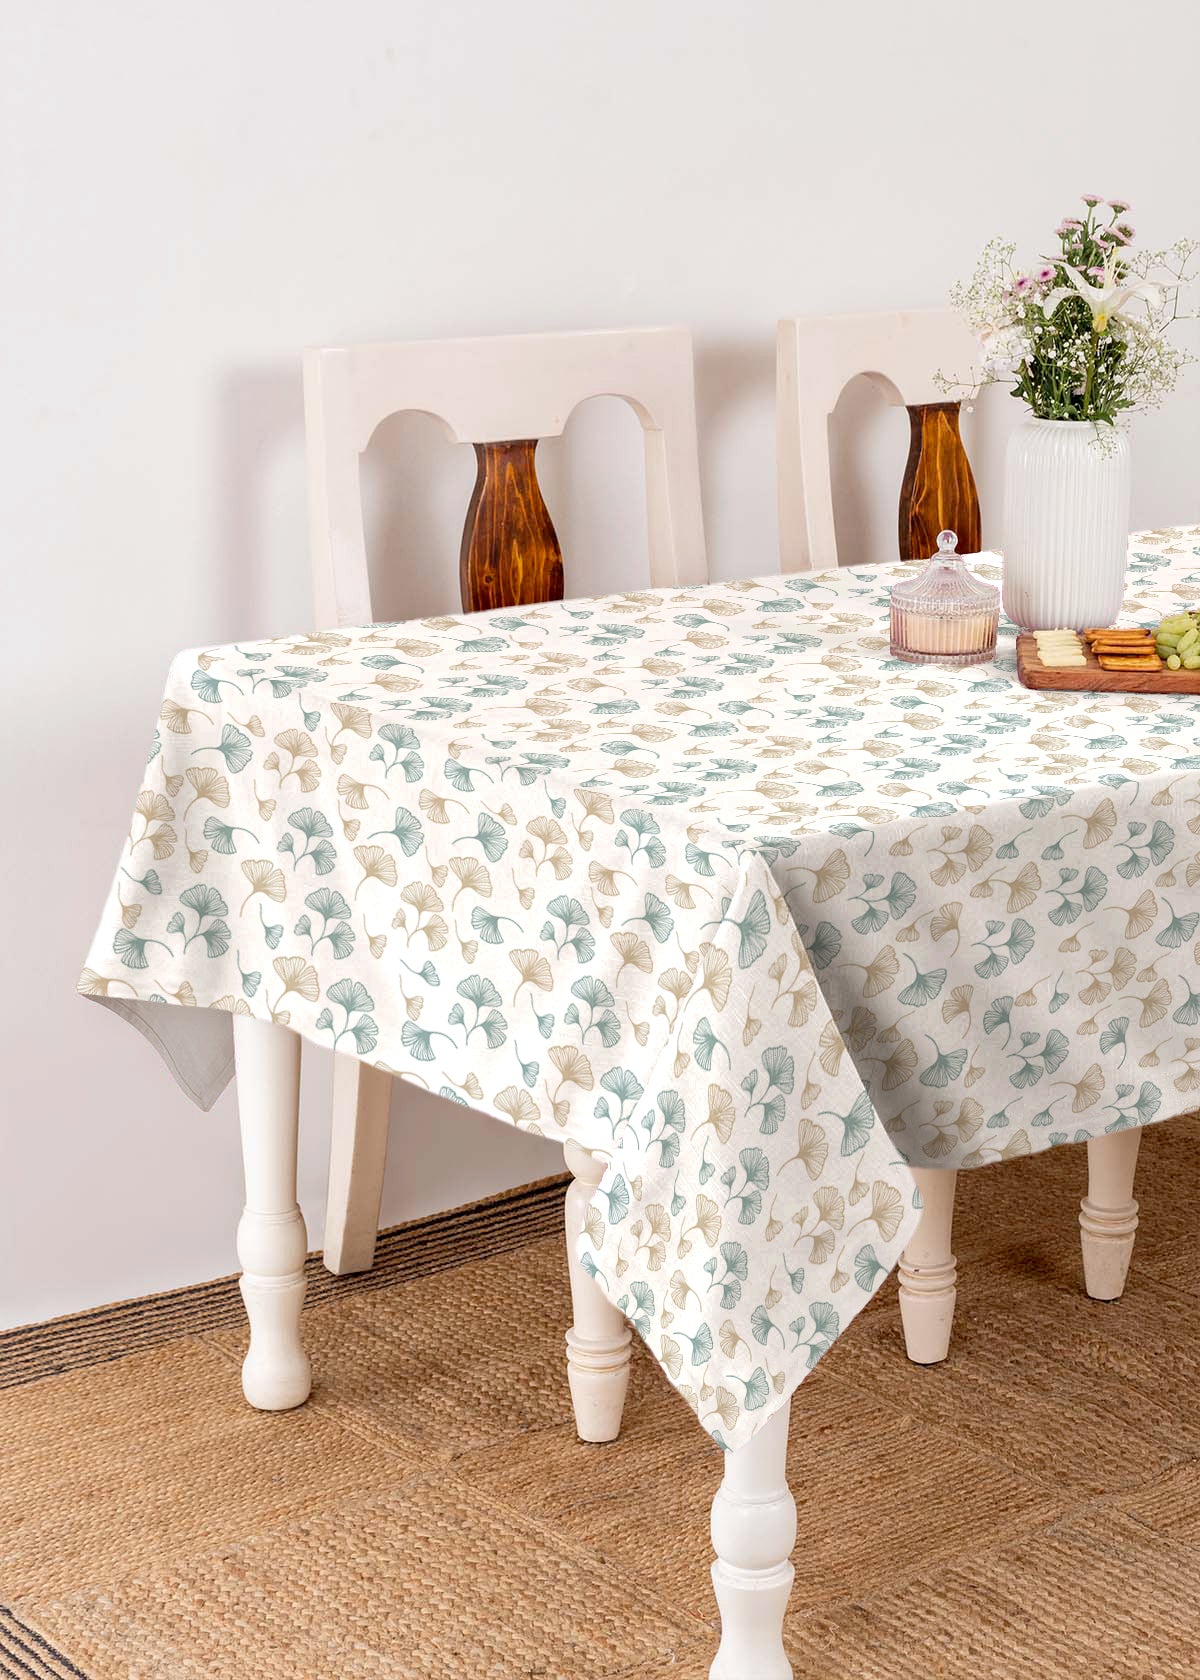 Gingko Printed 100% cotton floral table cloth for 4 seater or 6 seater dining - Nile blue